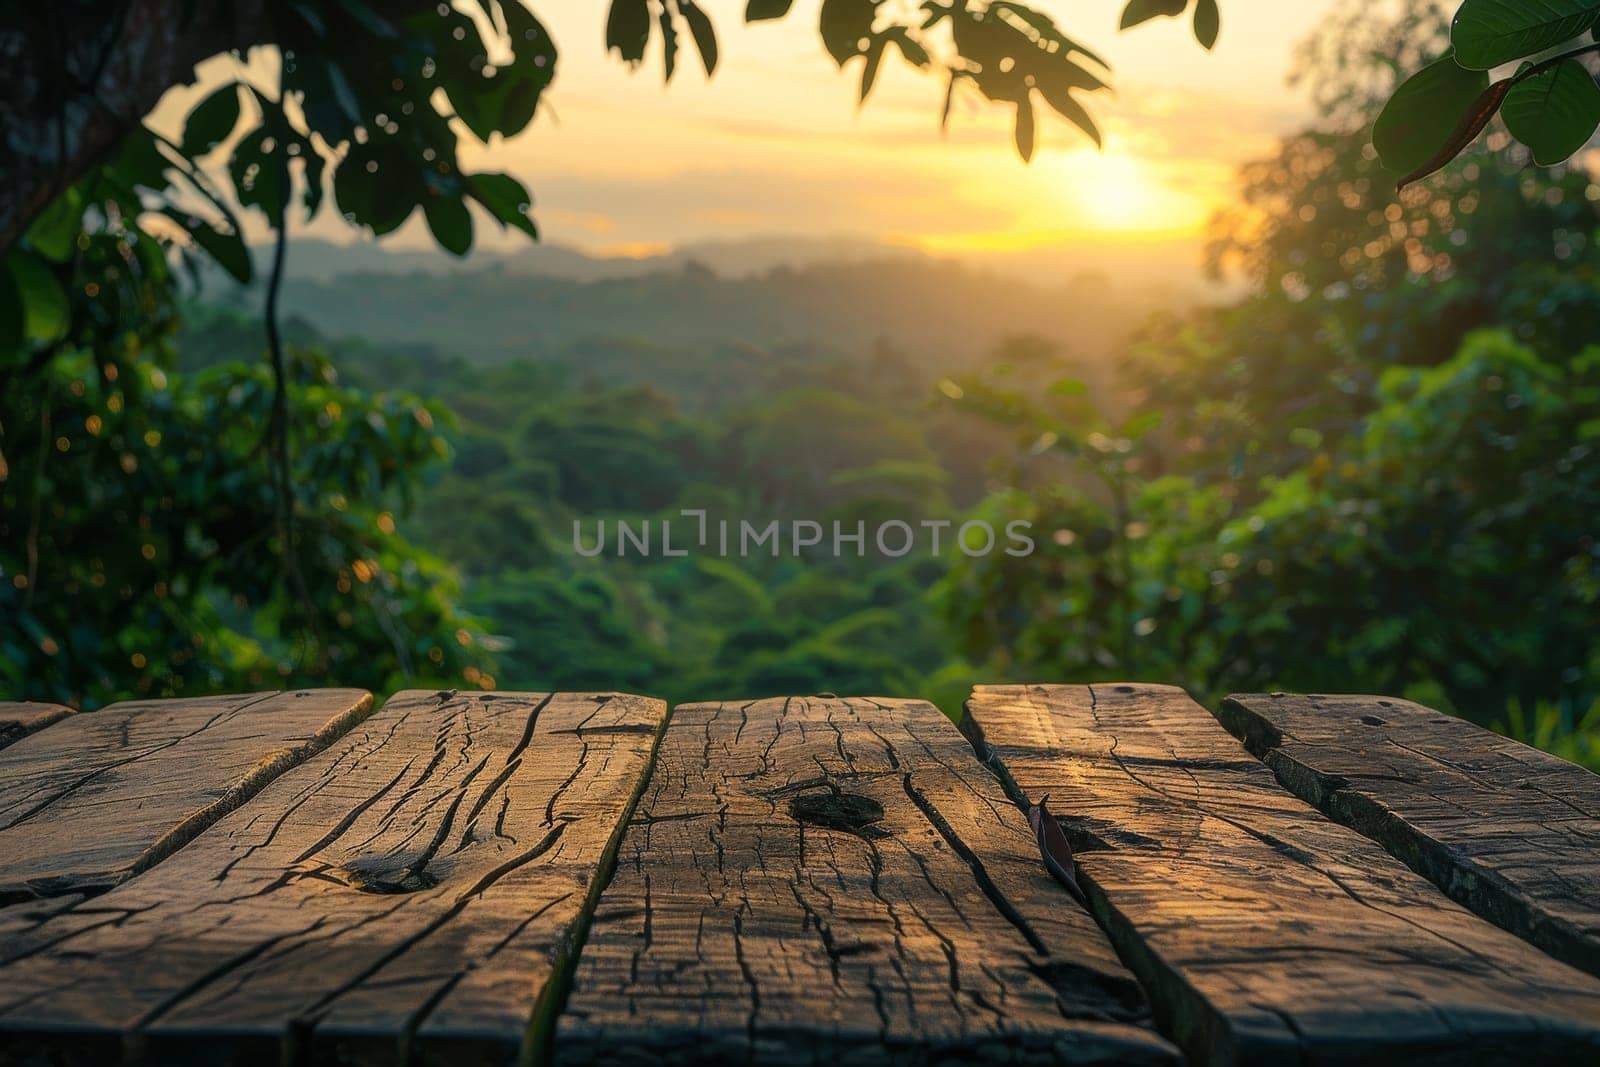 A wooden table with a view of the mountains and a sunset in the background. The table is empty and the view is serene and peaceful